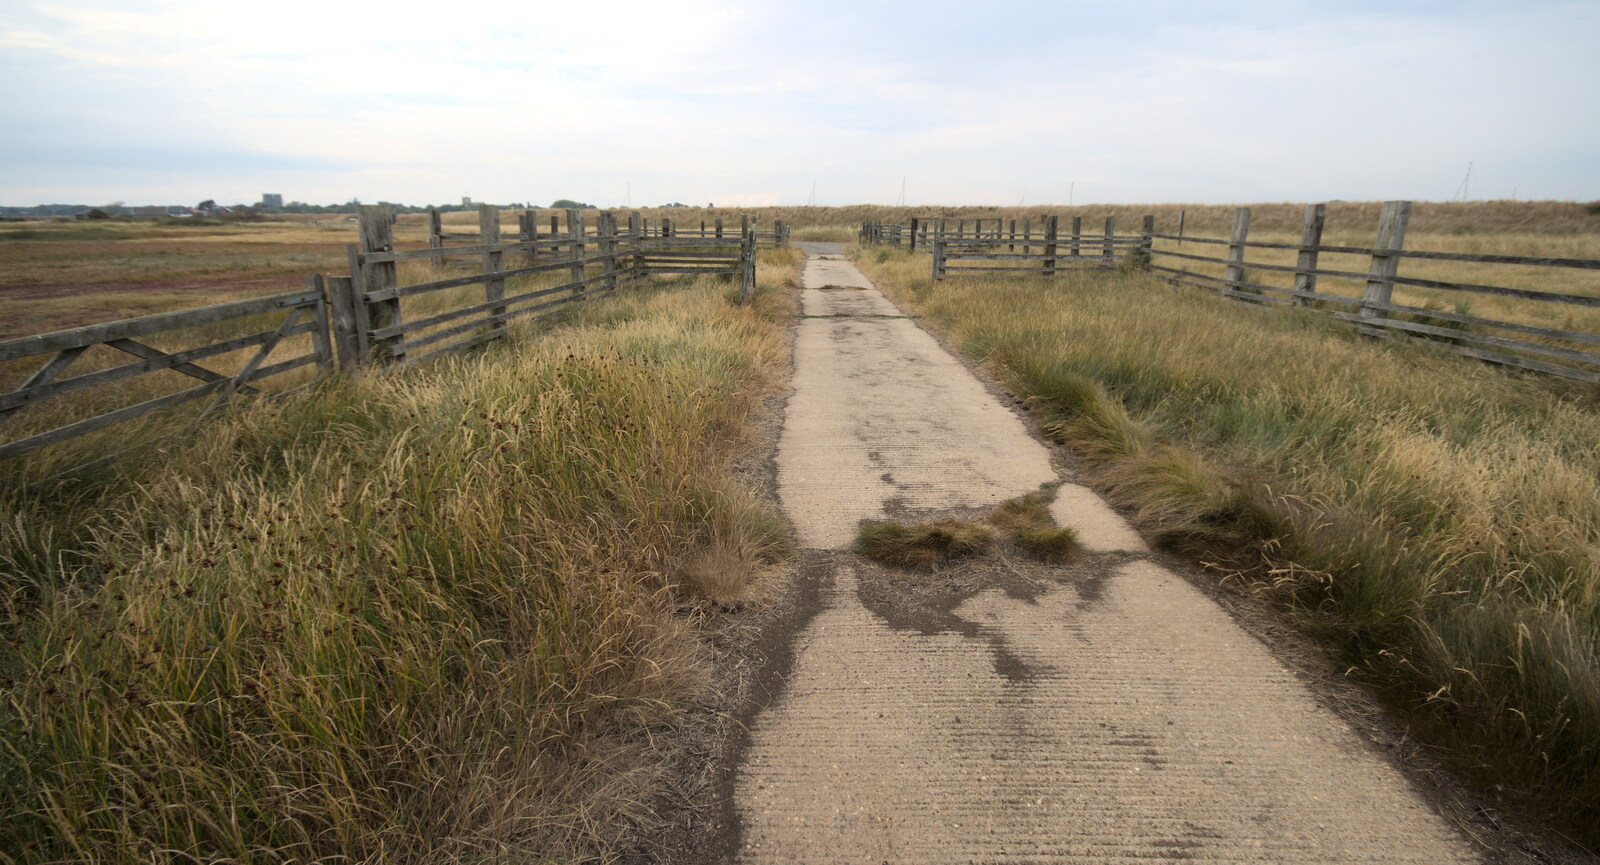 Wooden fences surround the path on the Ness from A Trip to Orford Ness, Orford, Suffolk - 16th August 2022